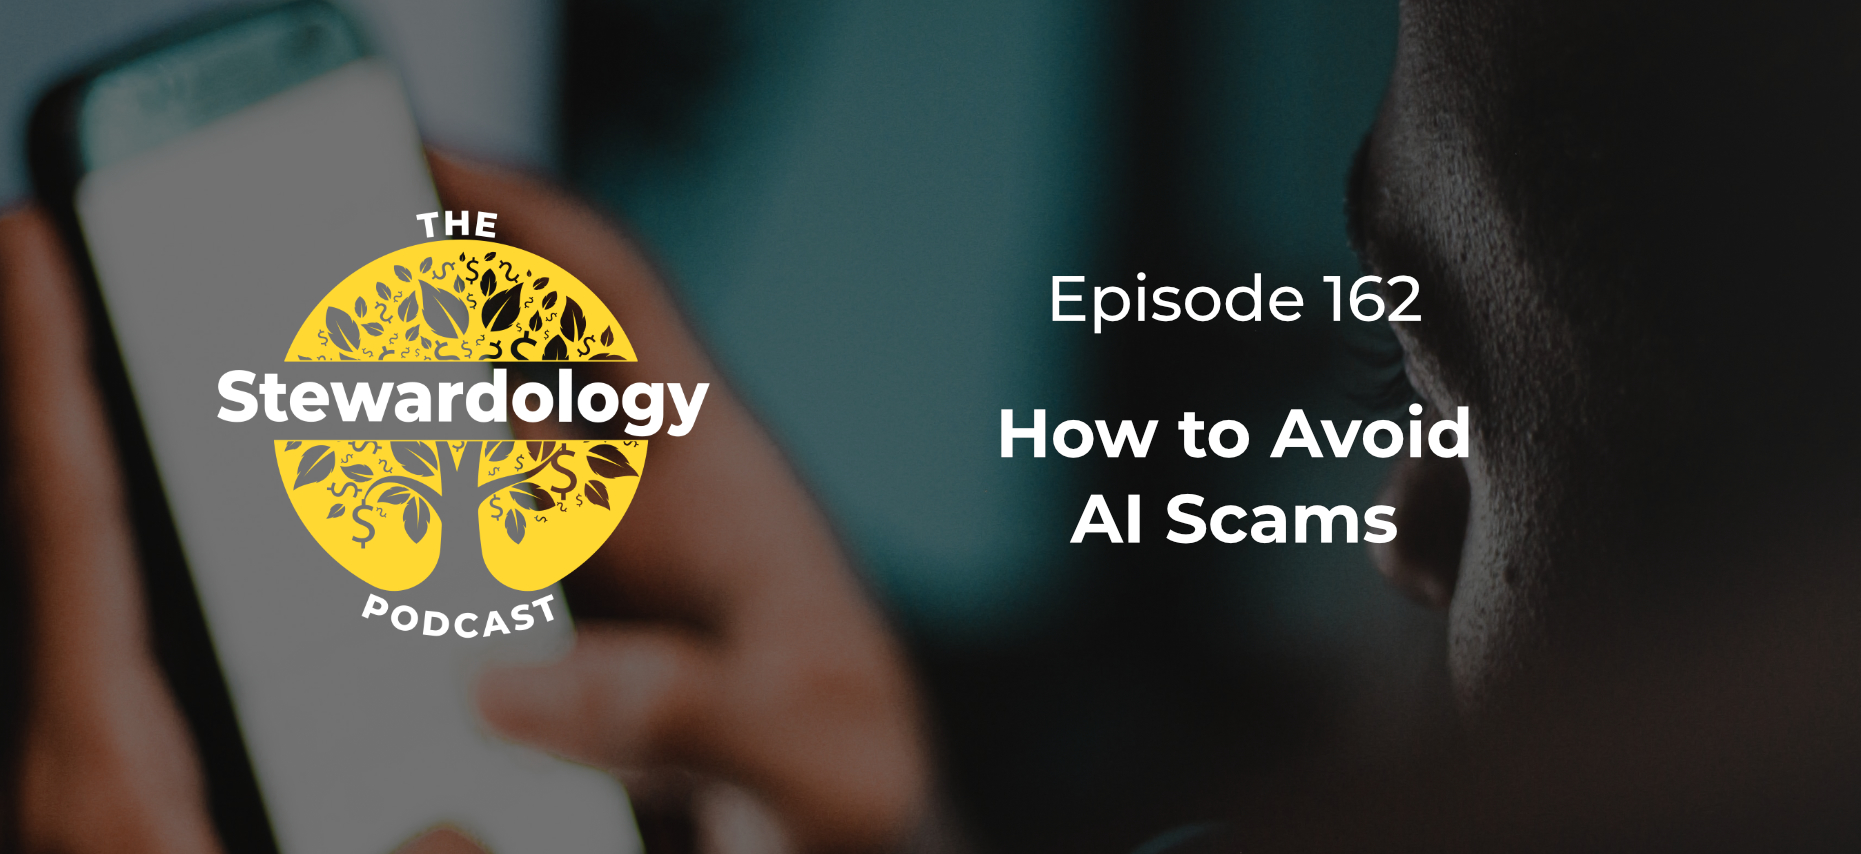 How to Avoid AI Scams